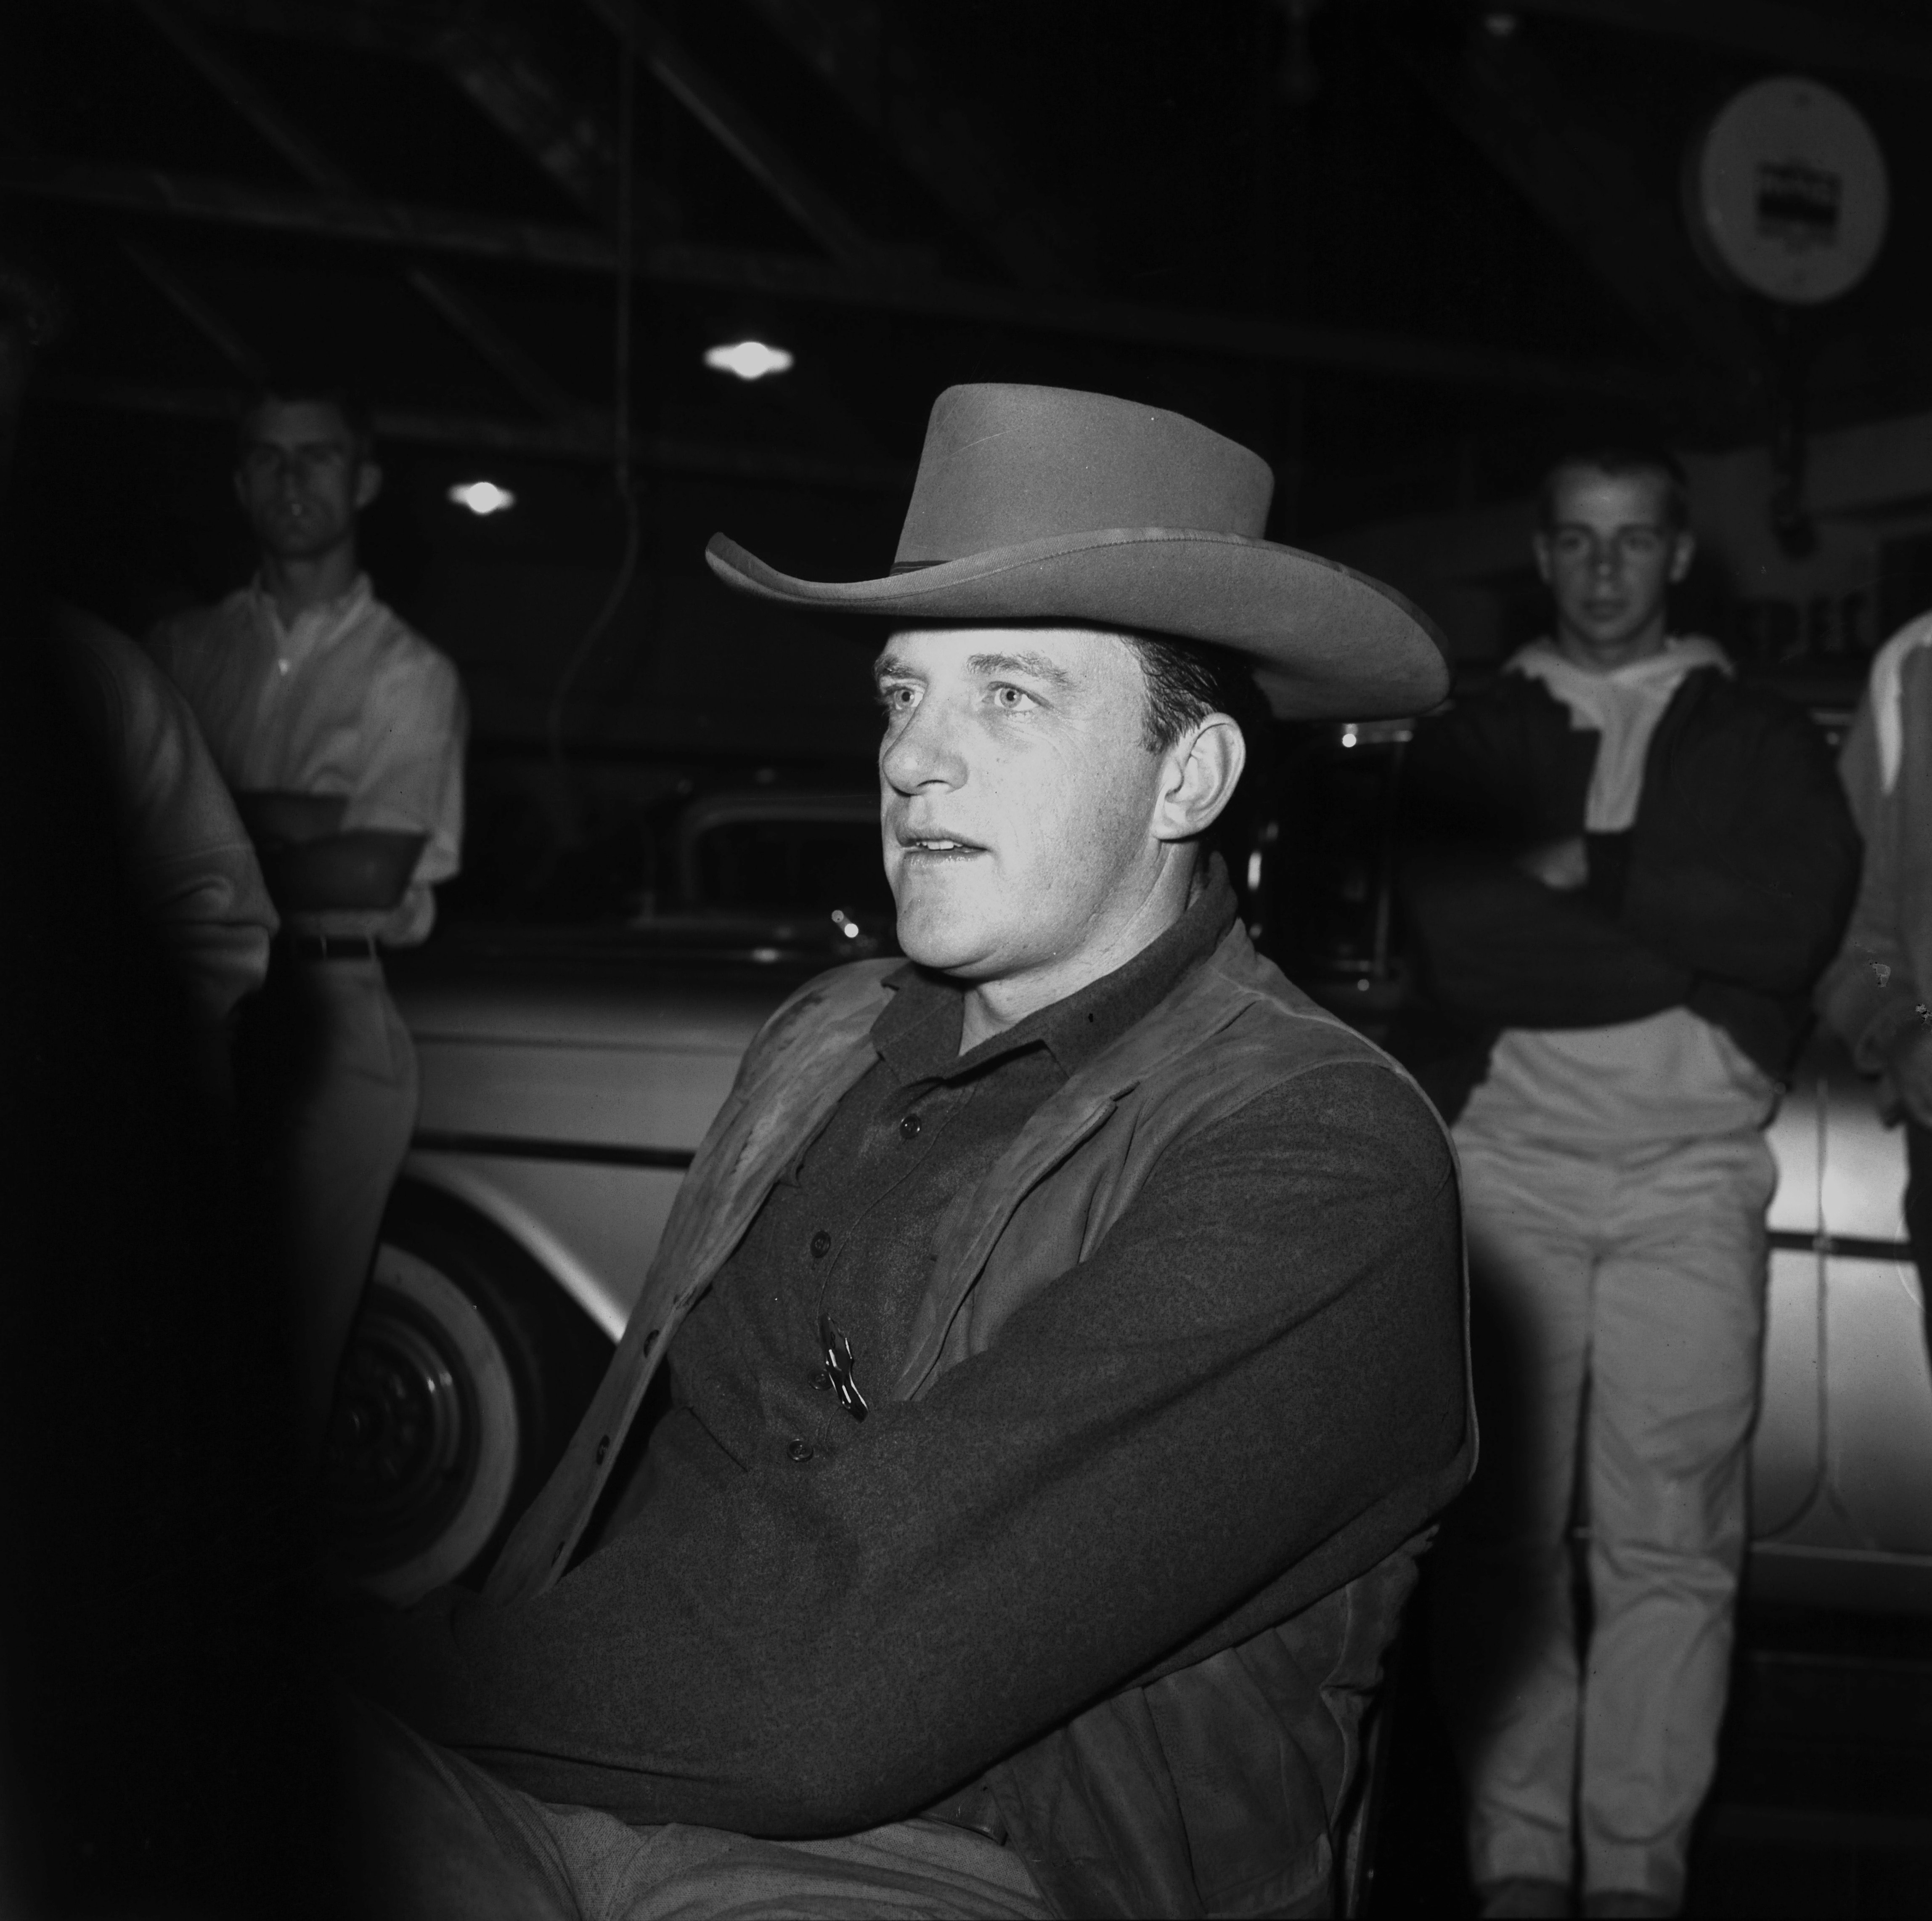  Actor James Arness waits on the set of "Gunsmoke" in Los Angeles, California. | Source: Getty Images